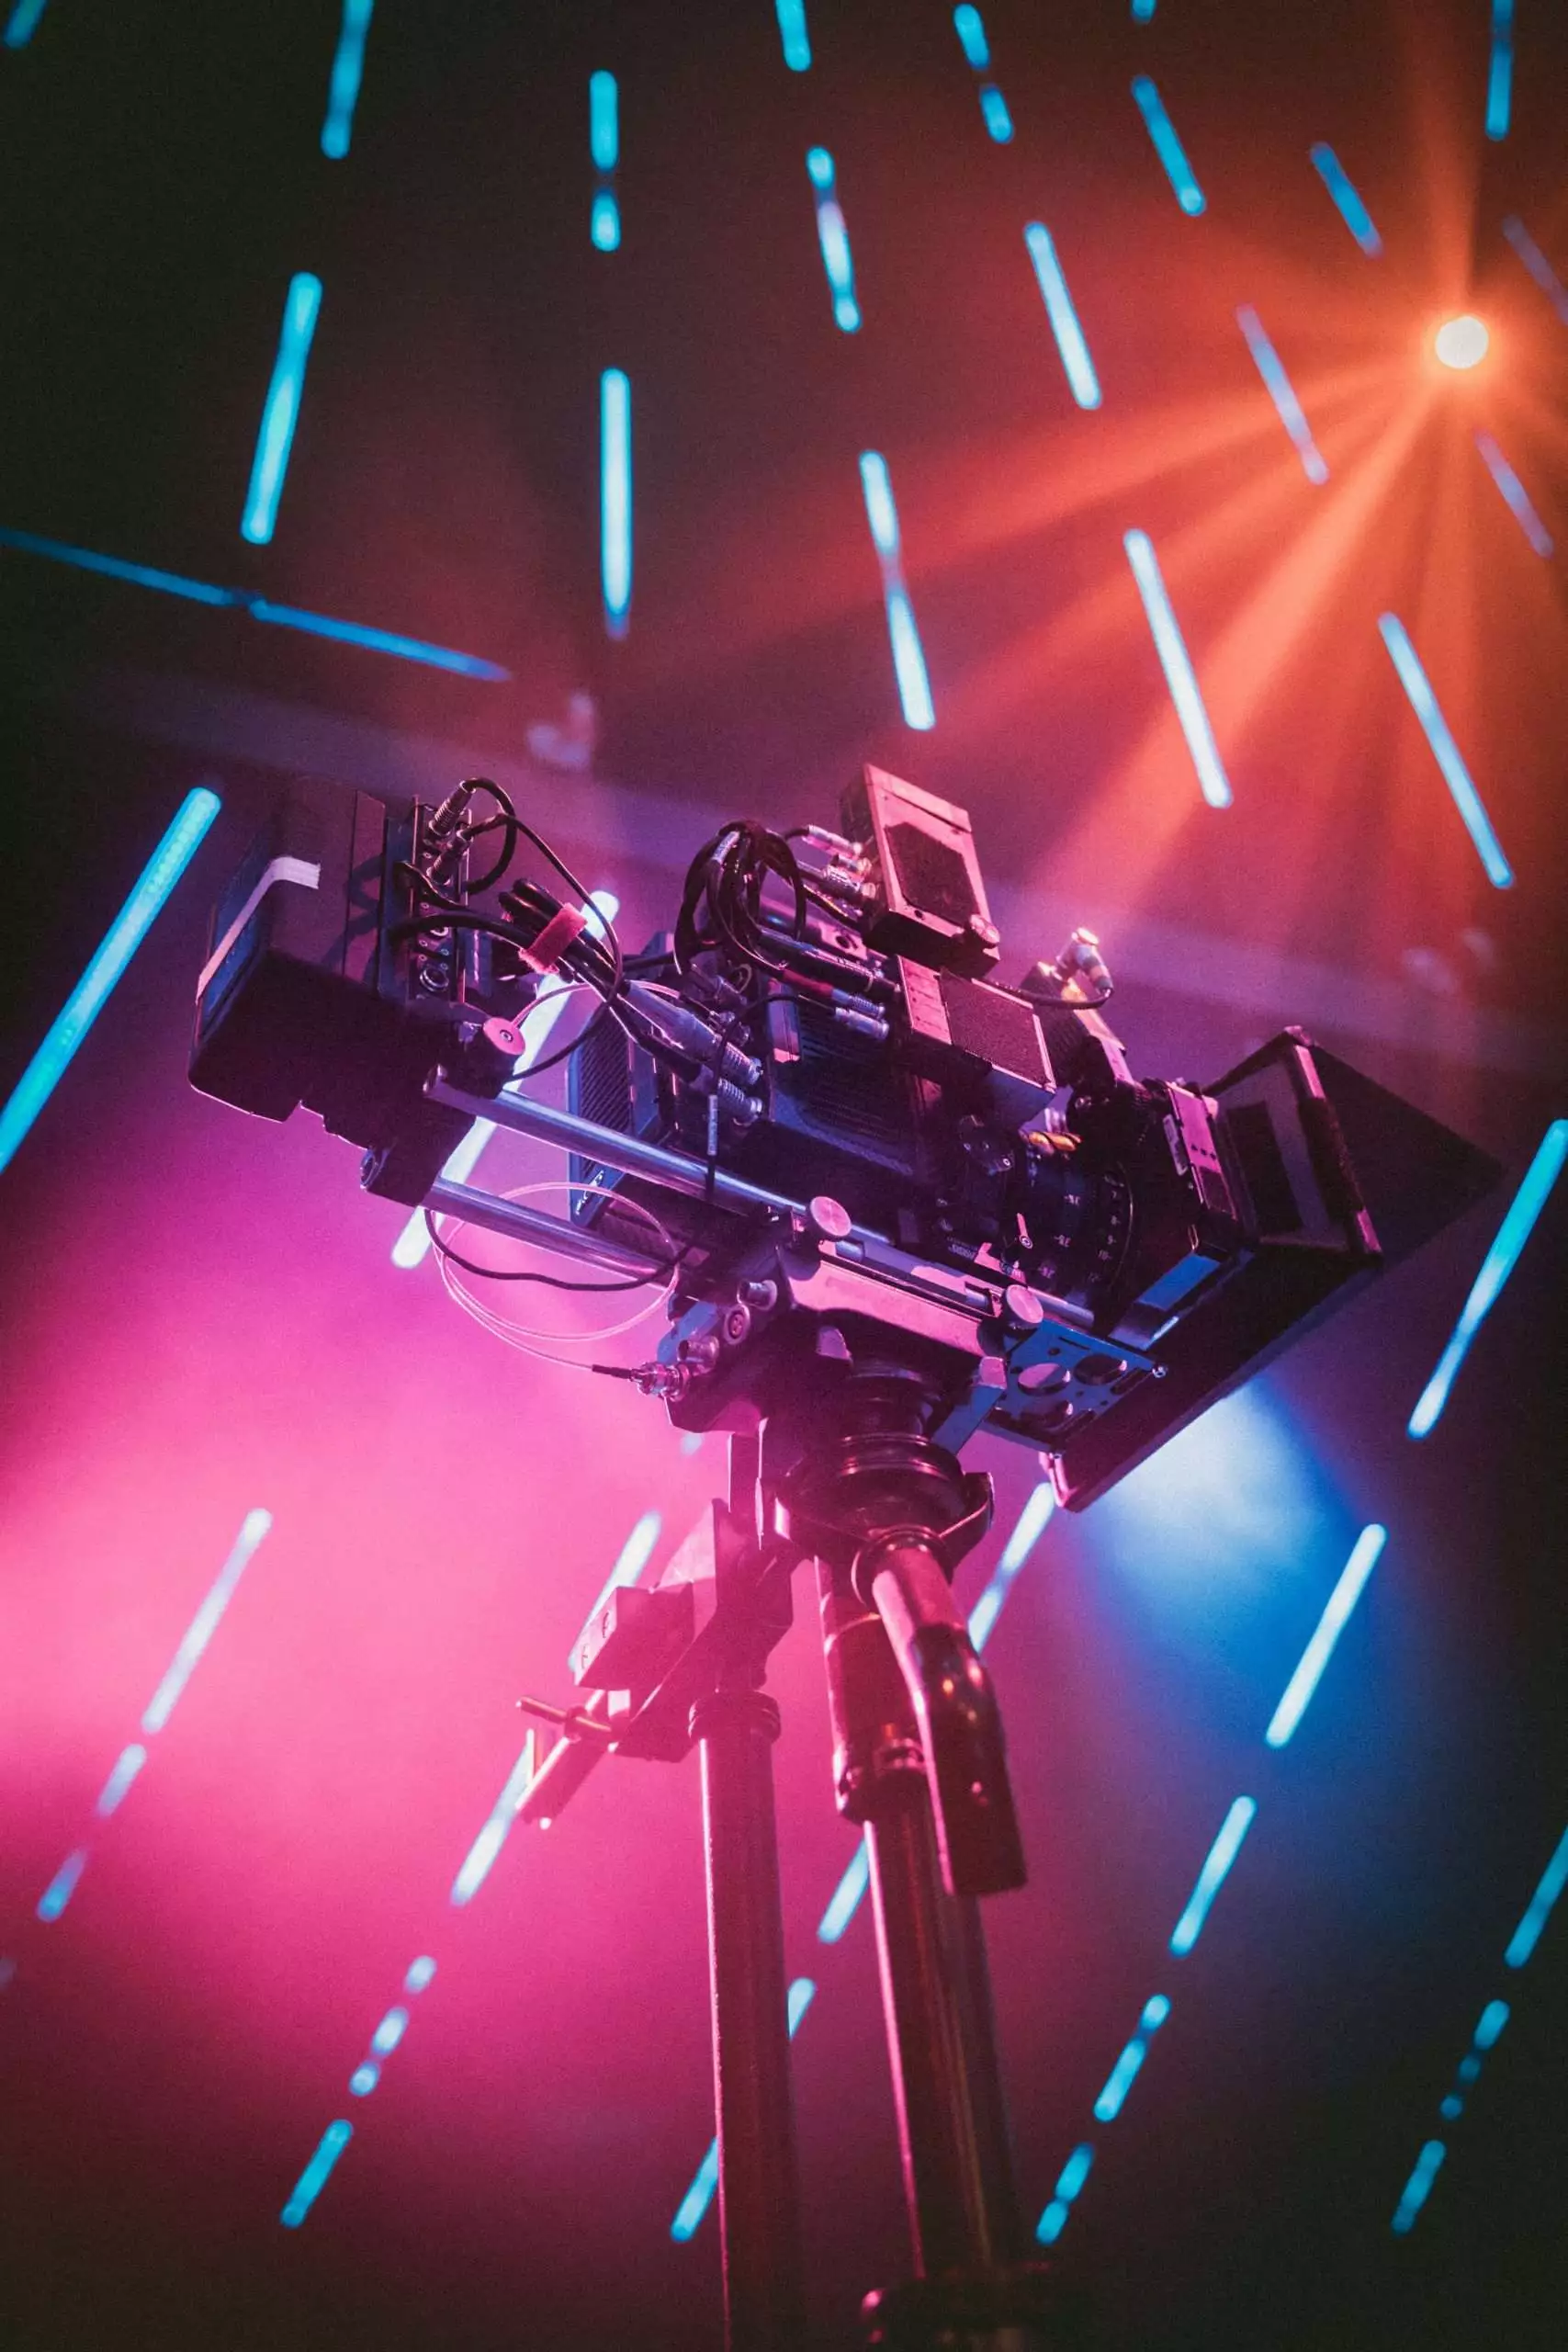 Digital has led to more access to filmmaking.